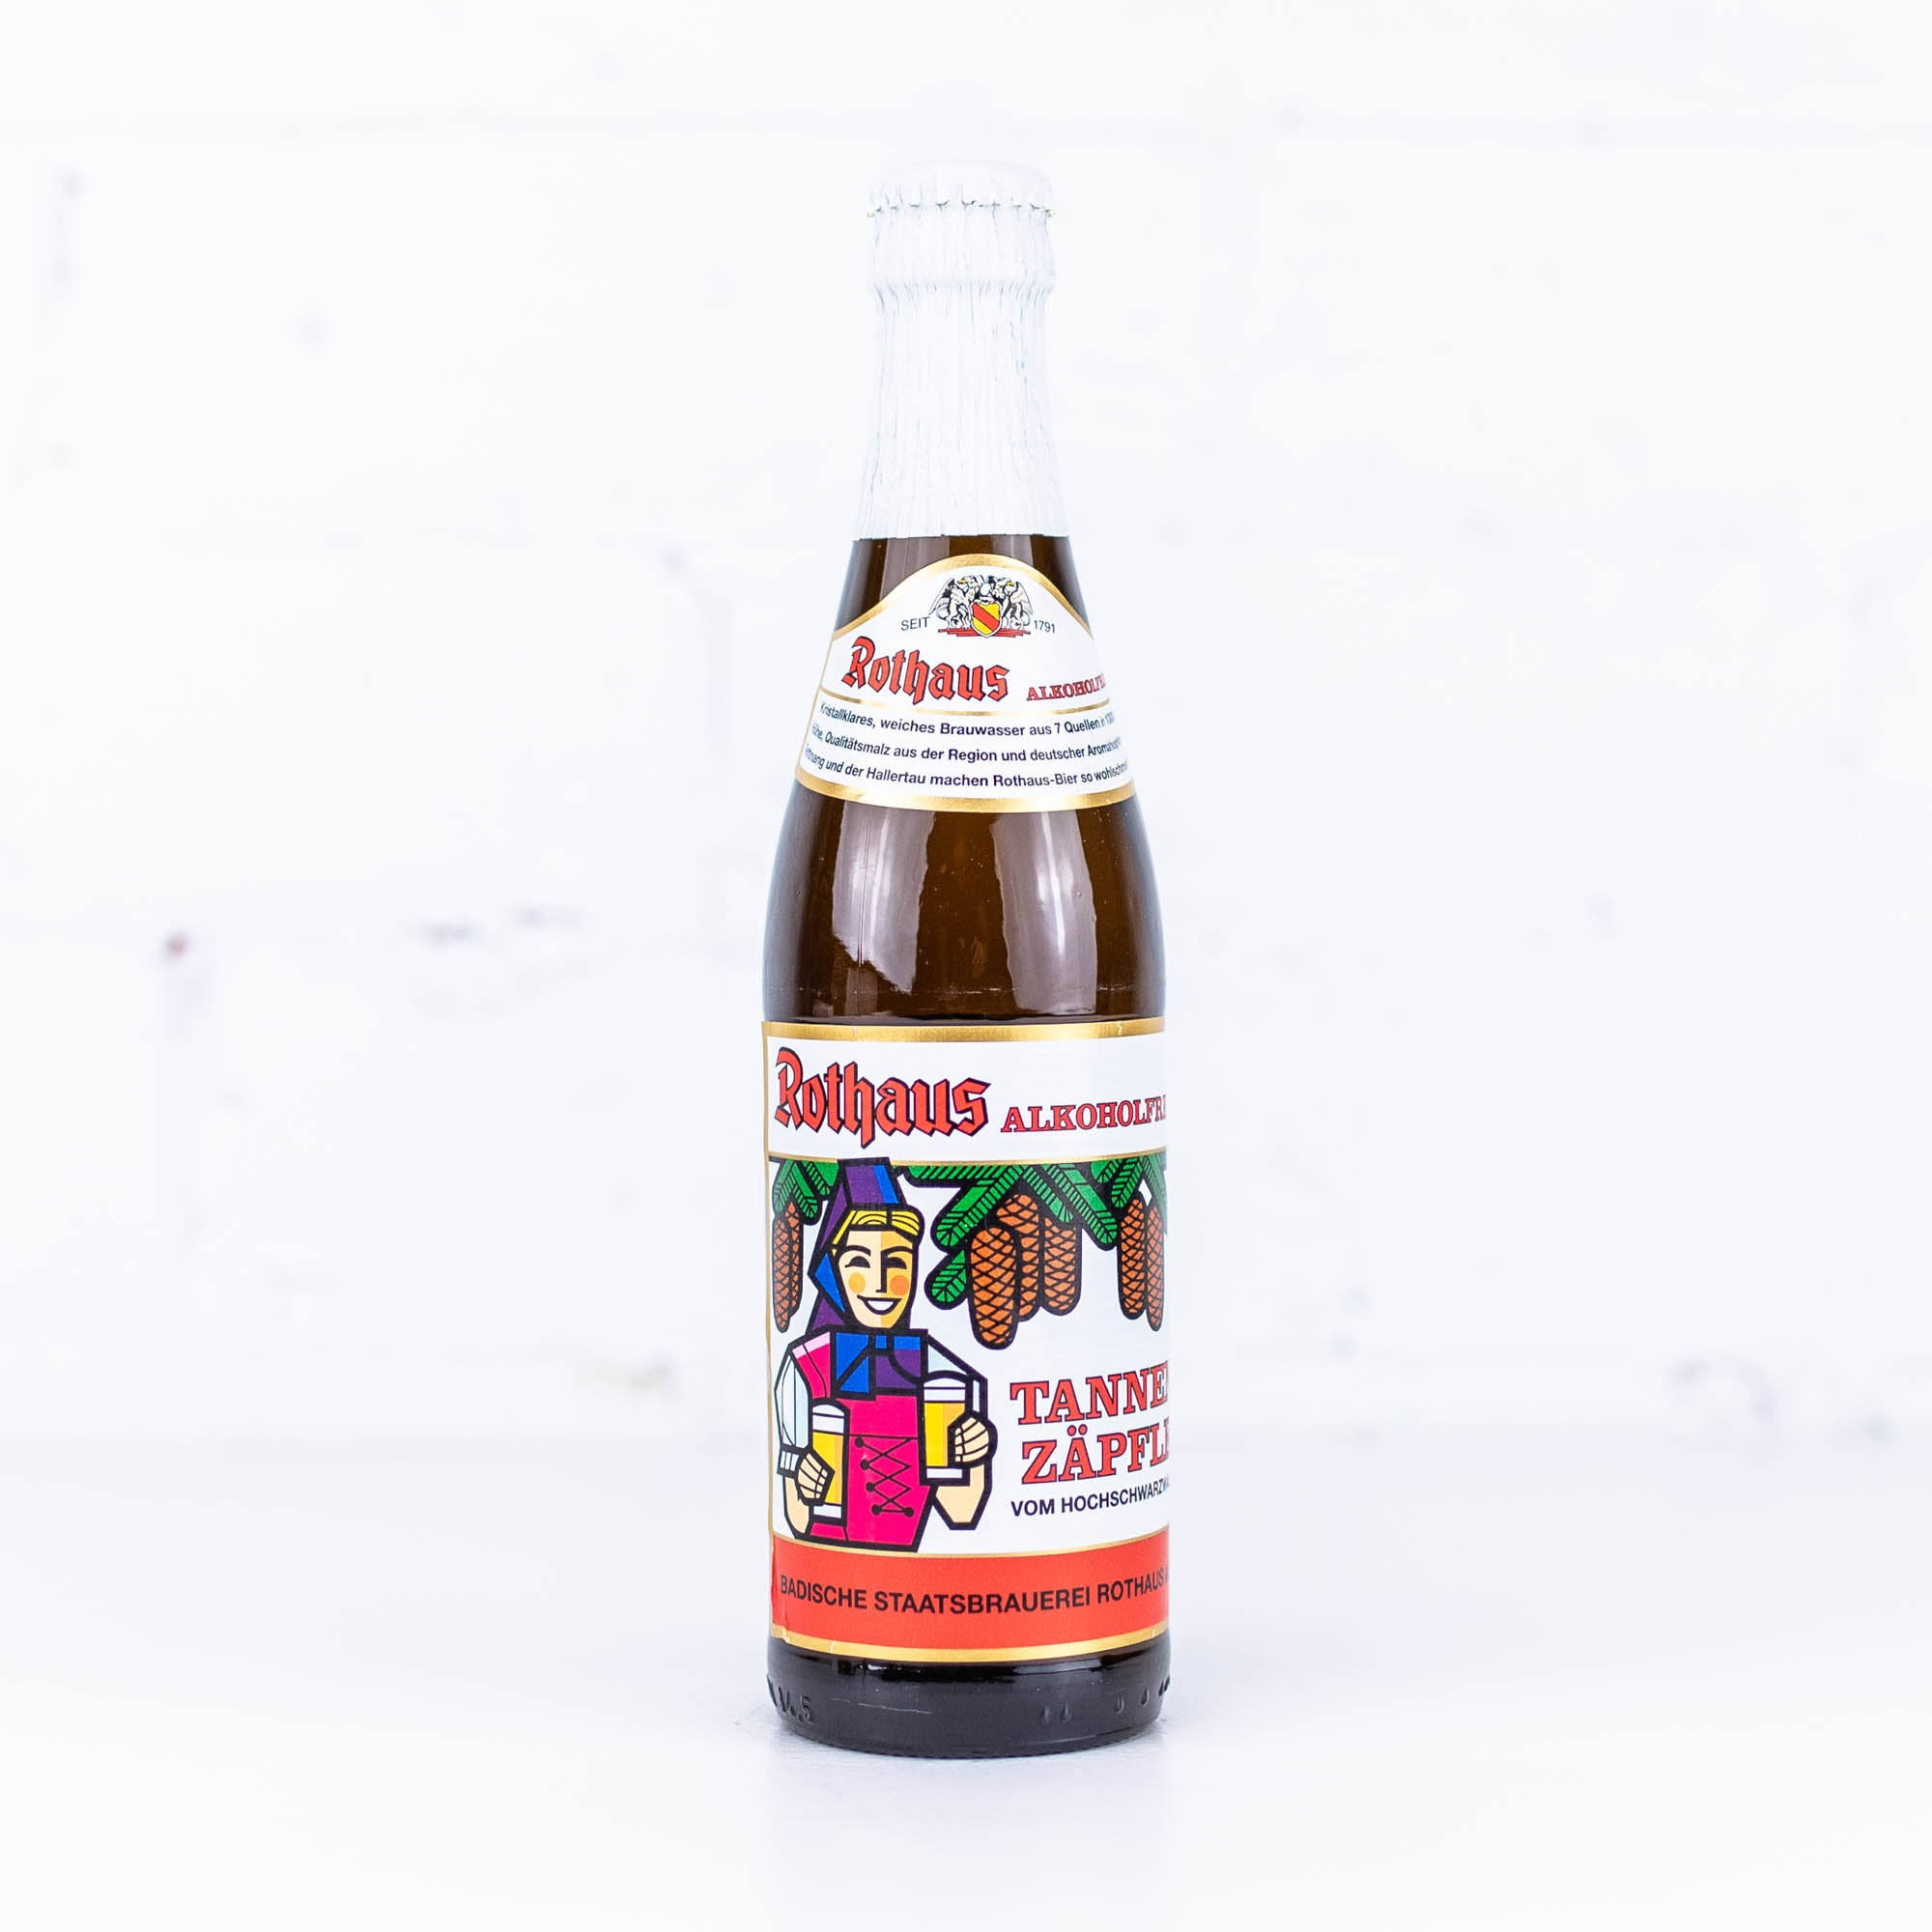 Rothaus Alcohol Free Tannenzapfle Lager / Pilsner Beer